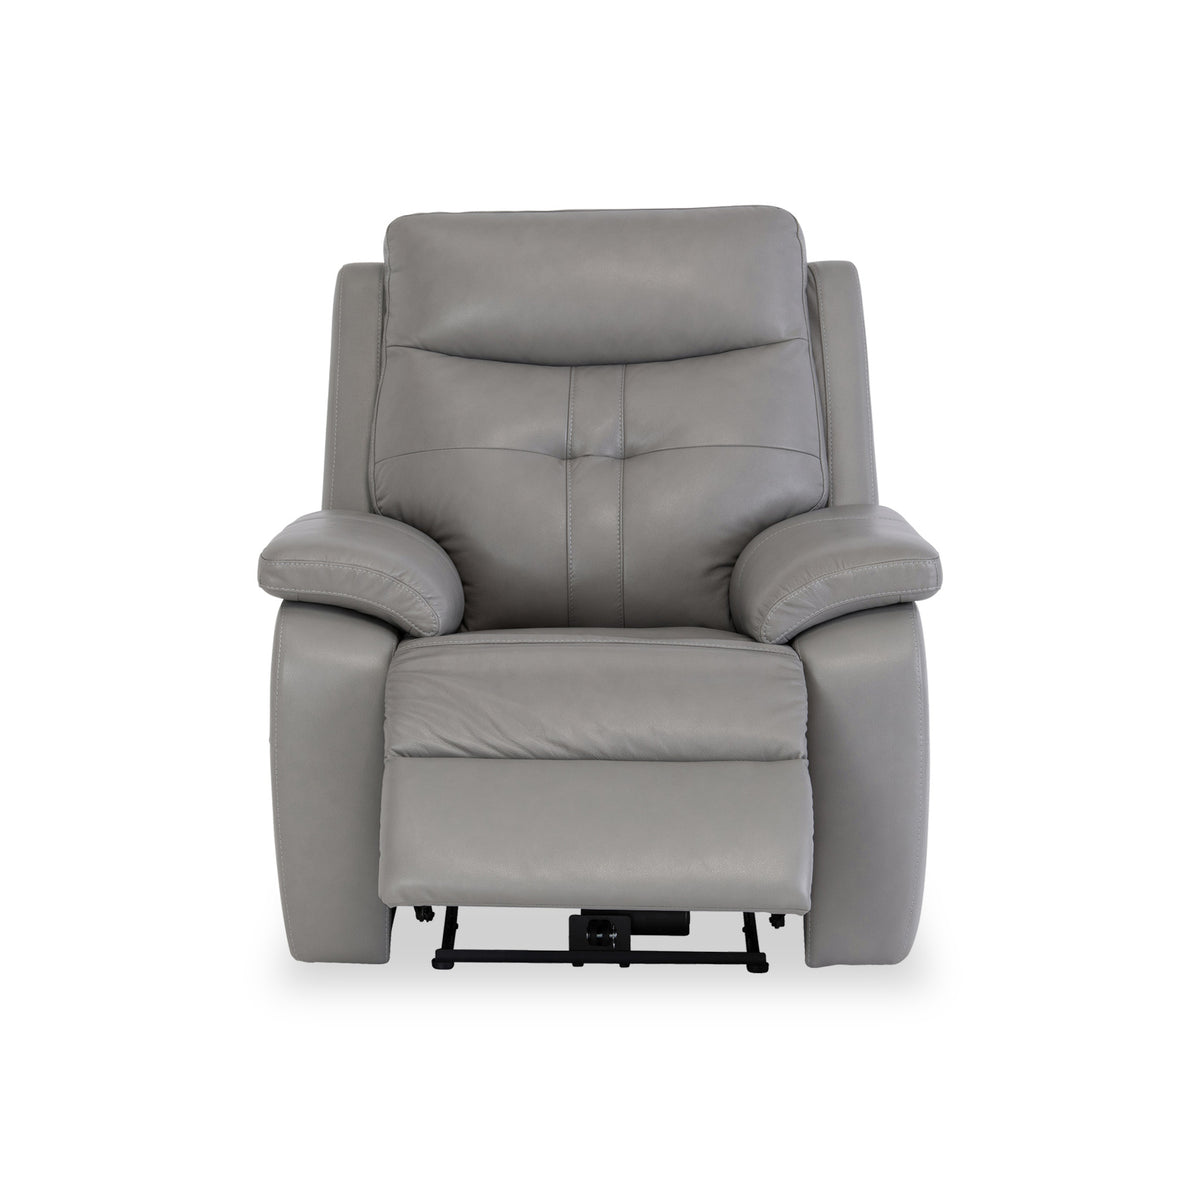 Talbot Charcoal Grey Leather Electric Reclining Armchair from Roseland Furniture